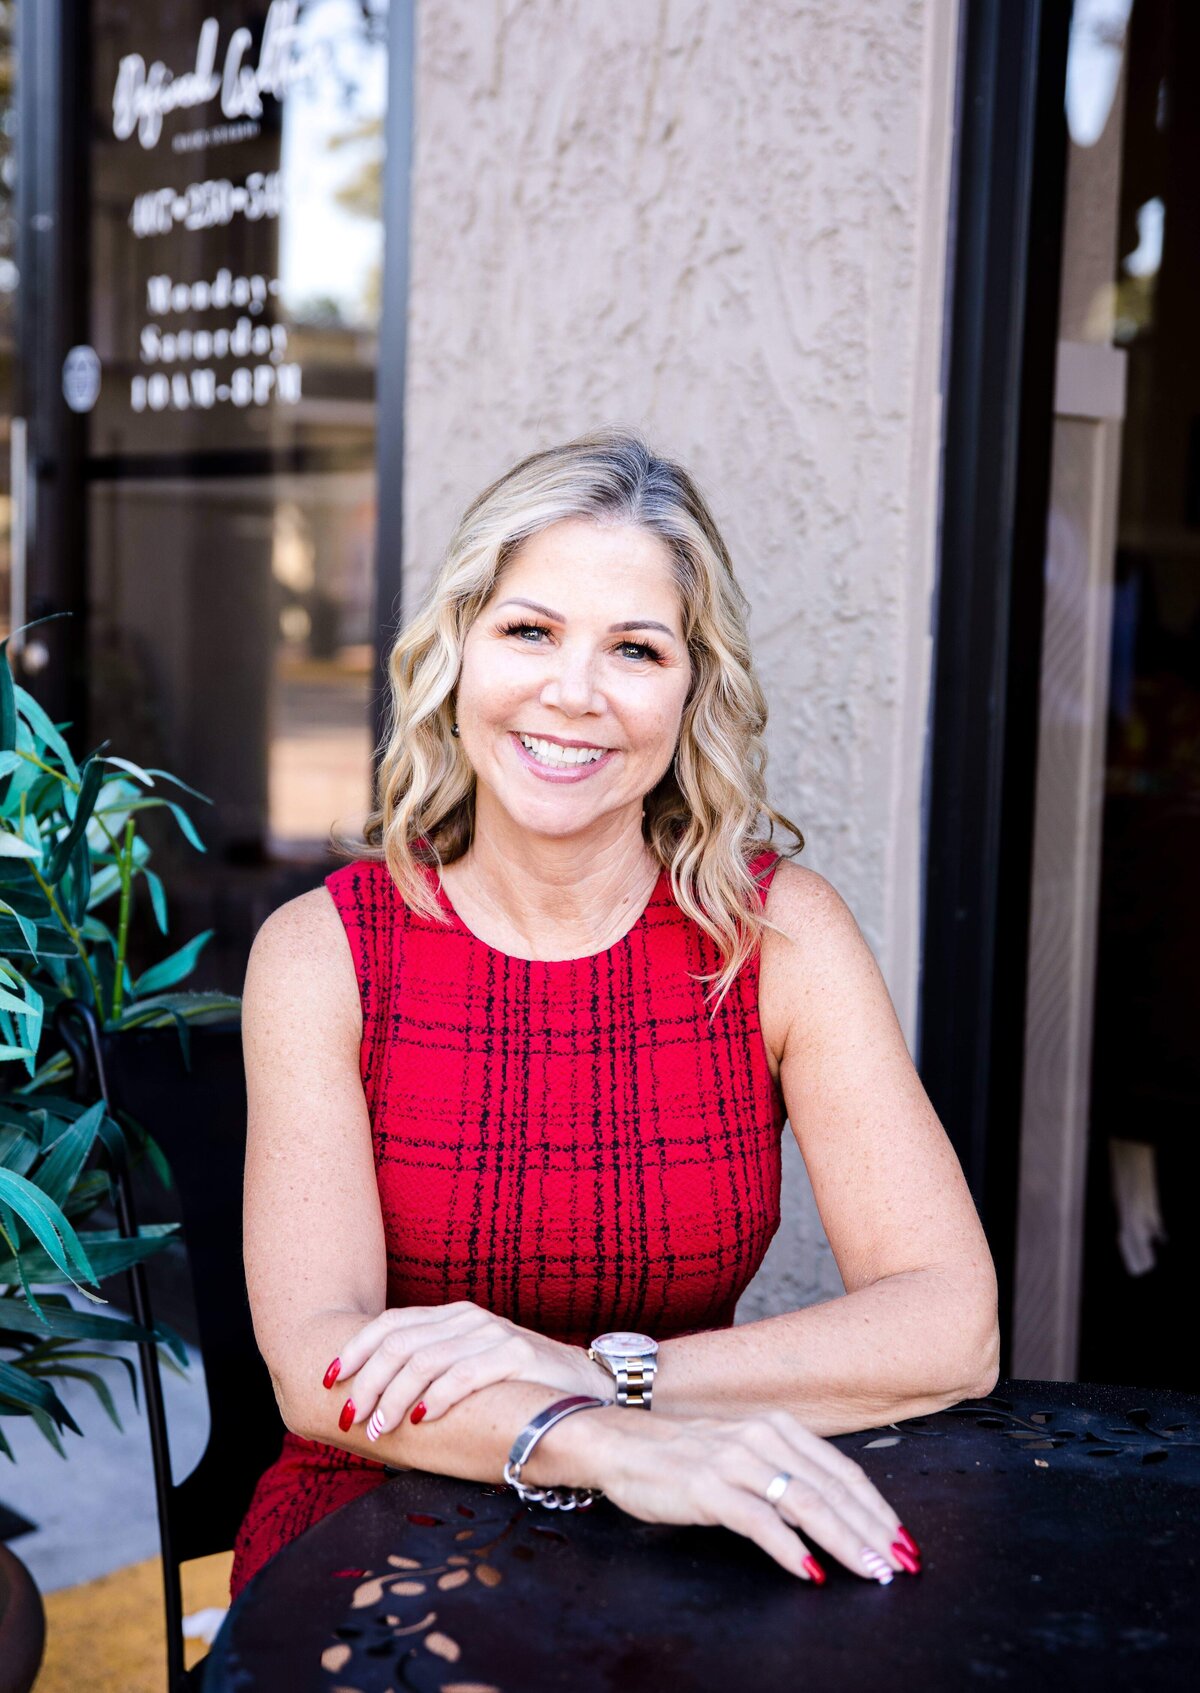 Orlando photographer photographs woman sitting at a cast-iron table outside of a local coffee shop with her hand on her forearm resting her elbows on the table smiling while in a red dress for brand photography in Orlando